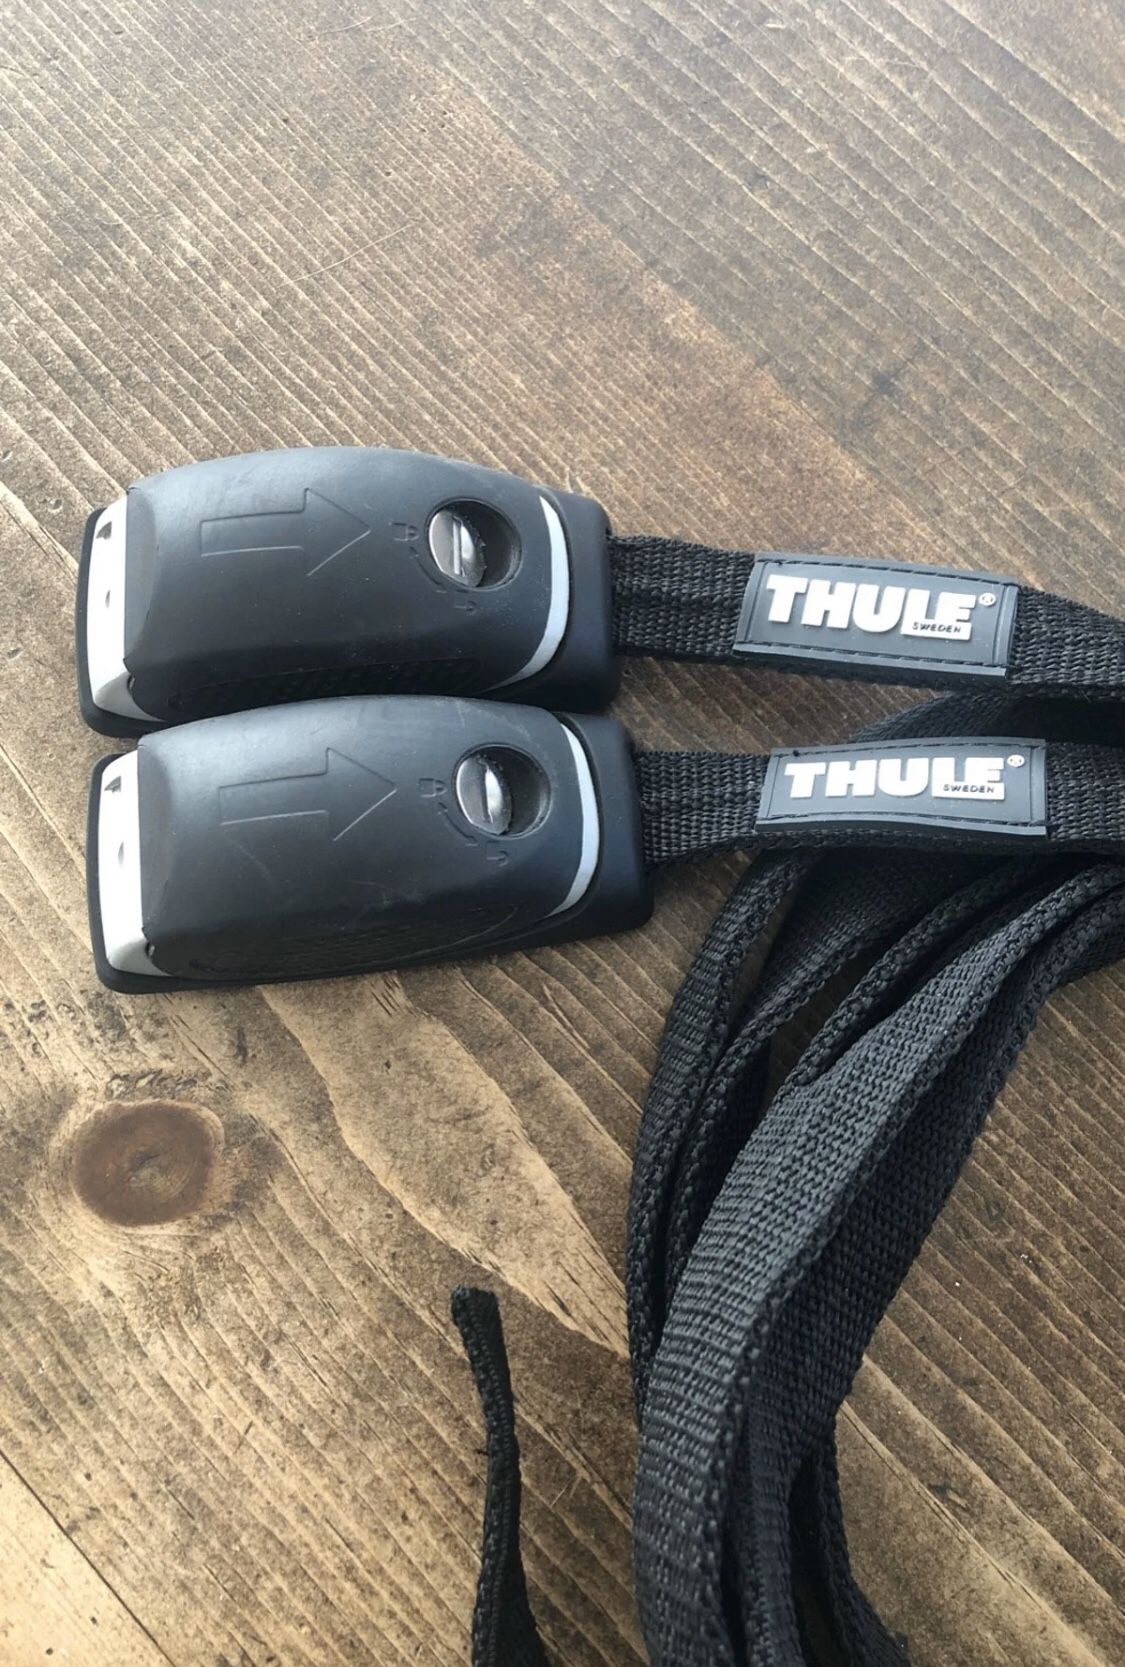 Brand New!! Thule Surfboard Locking Tie Downs with keys